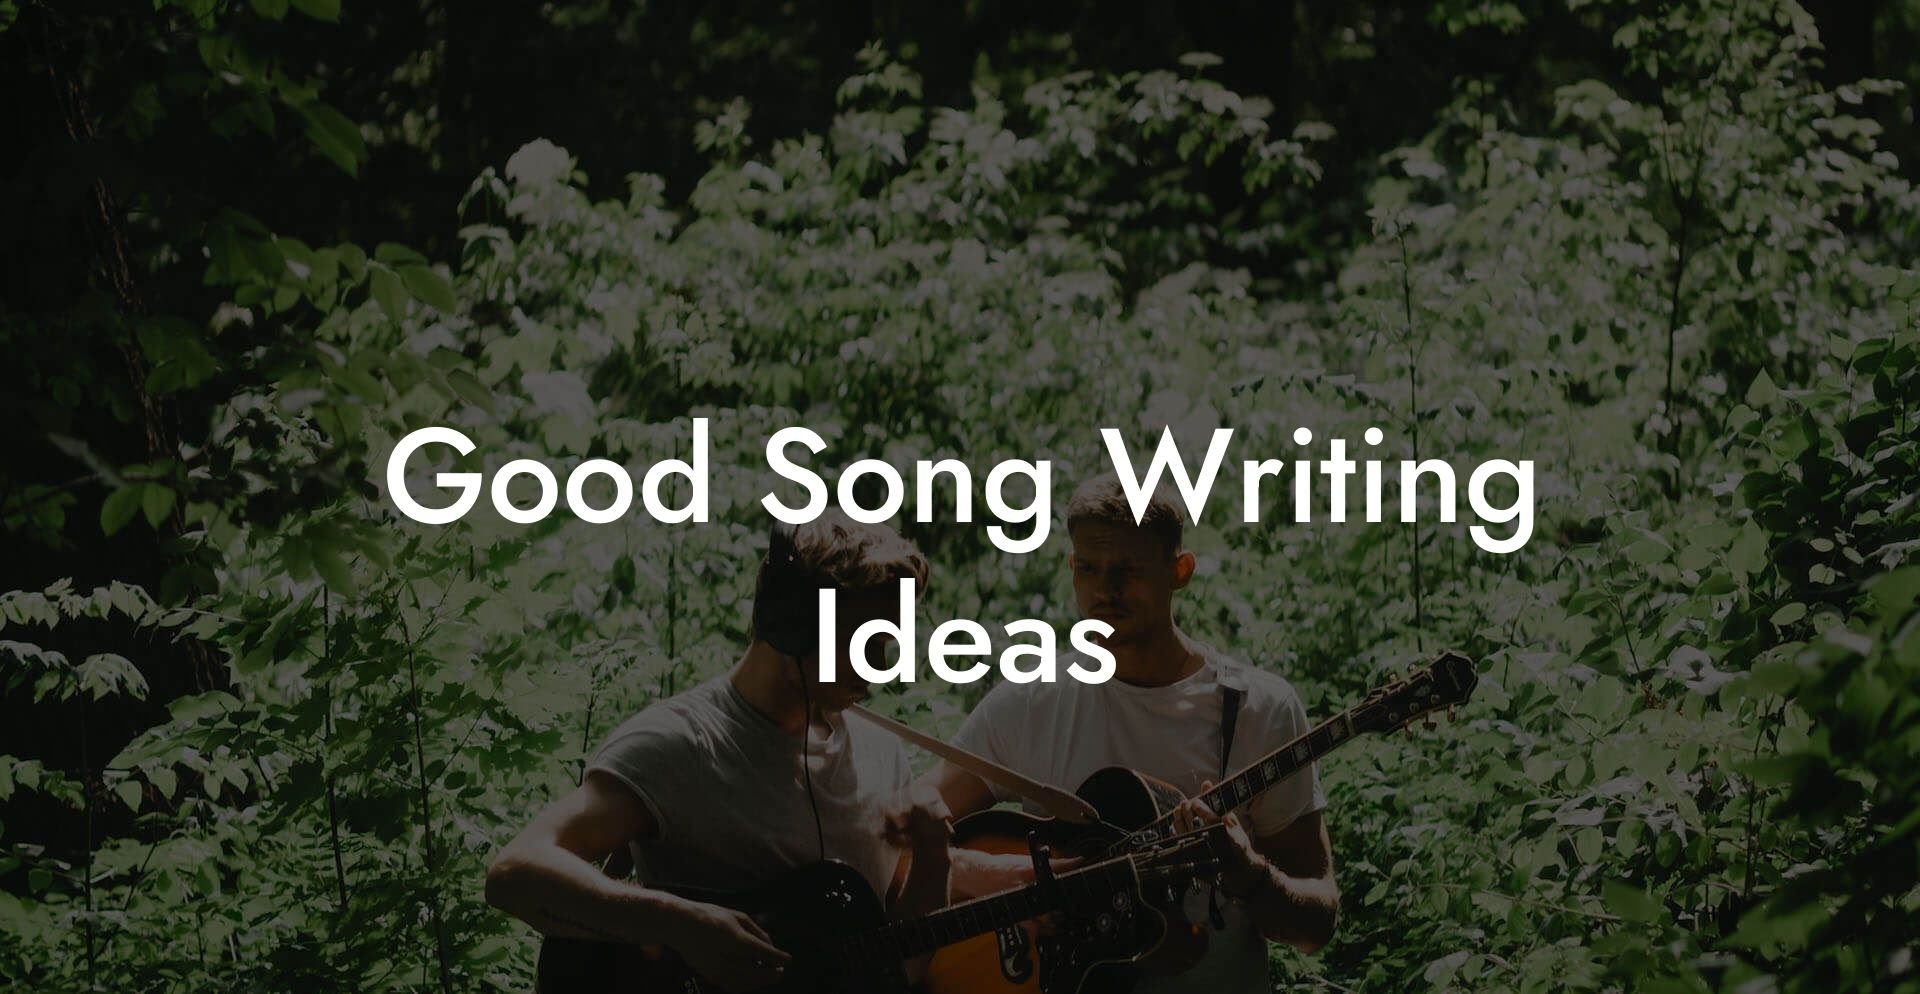 good song writing ideas lyric assistant